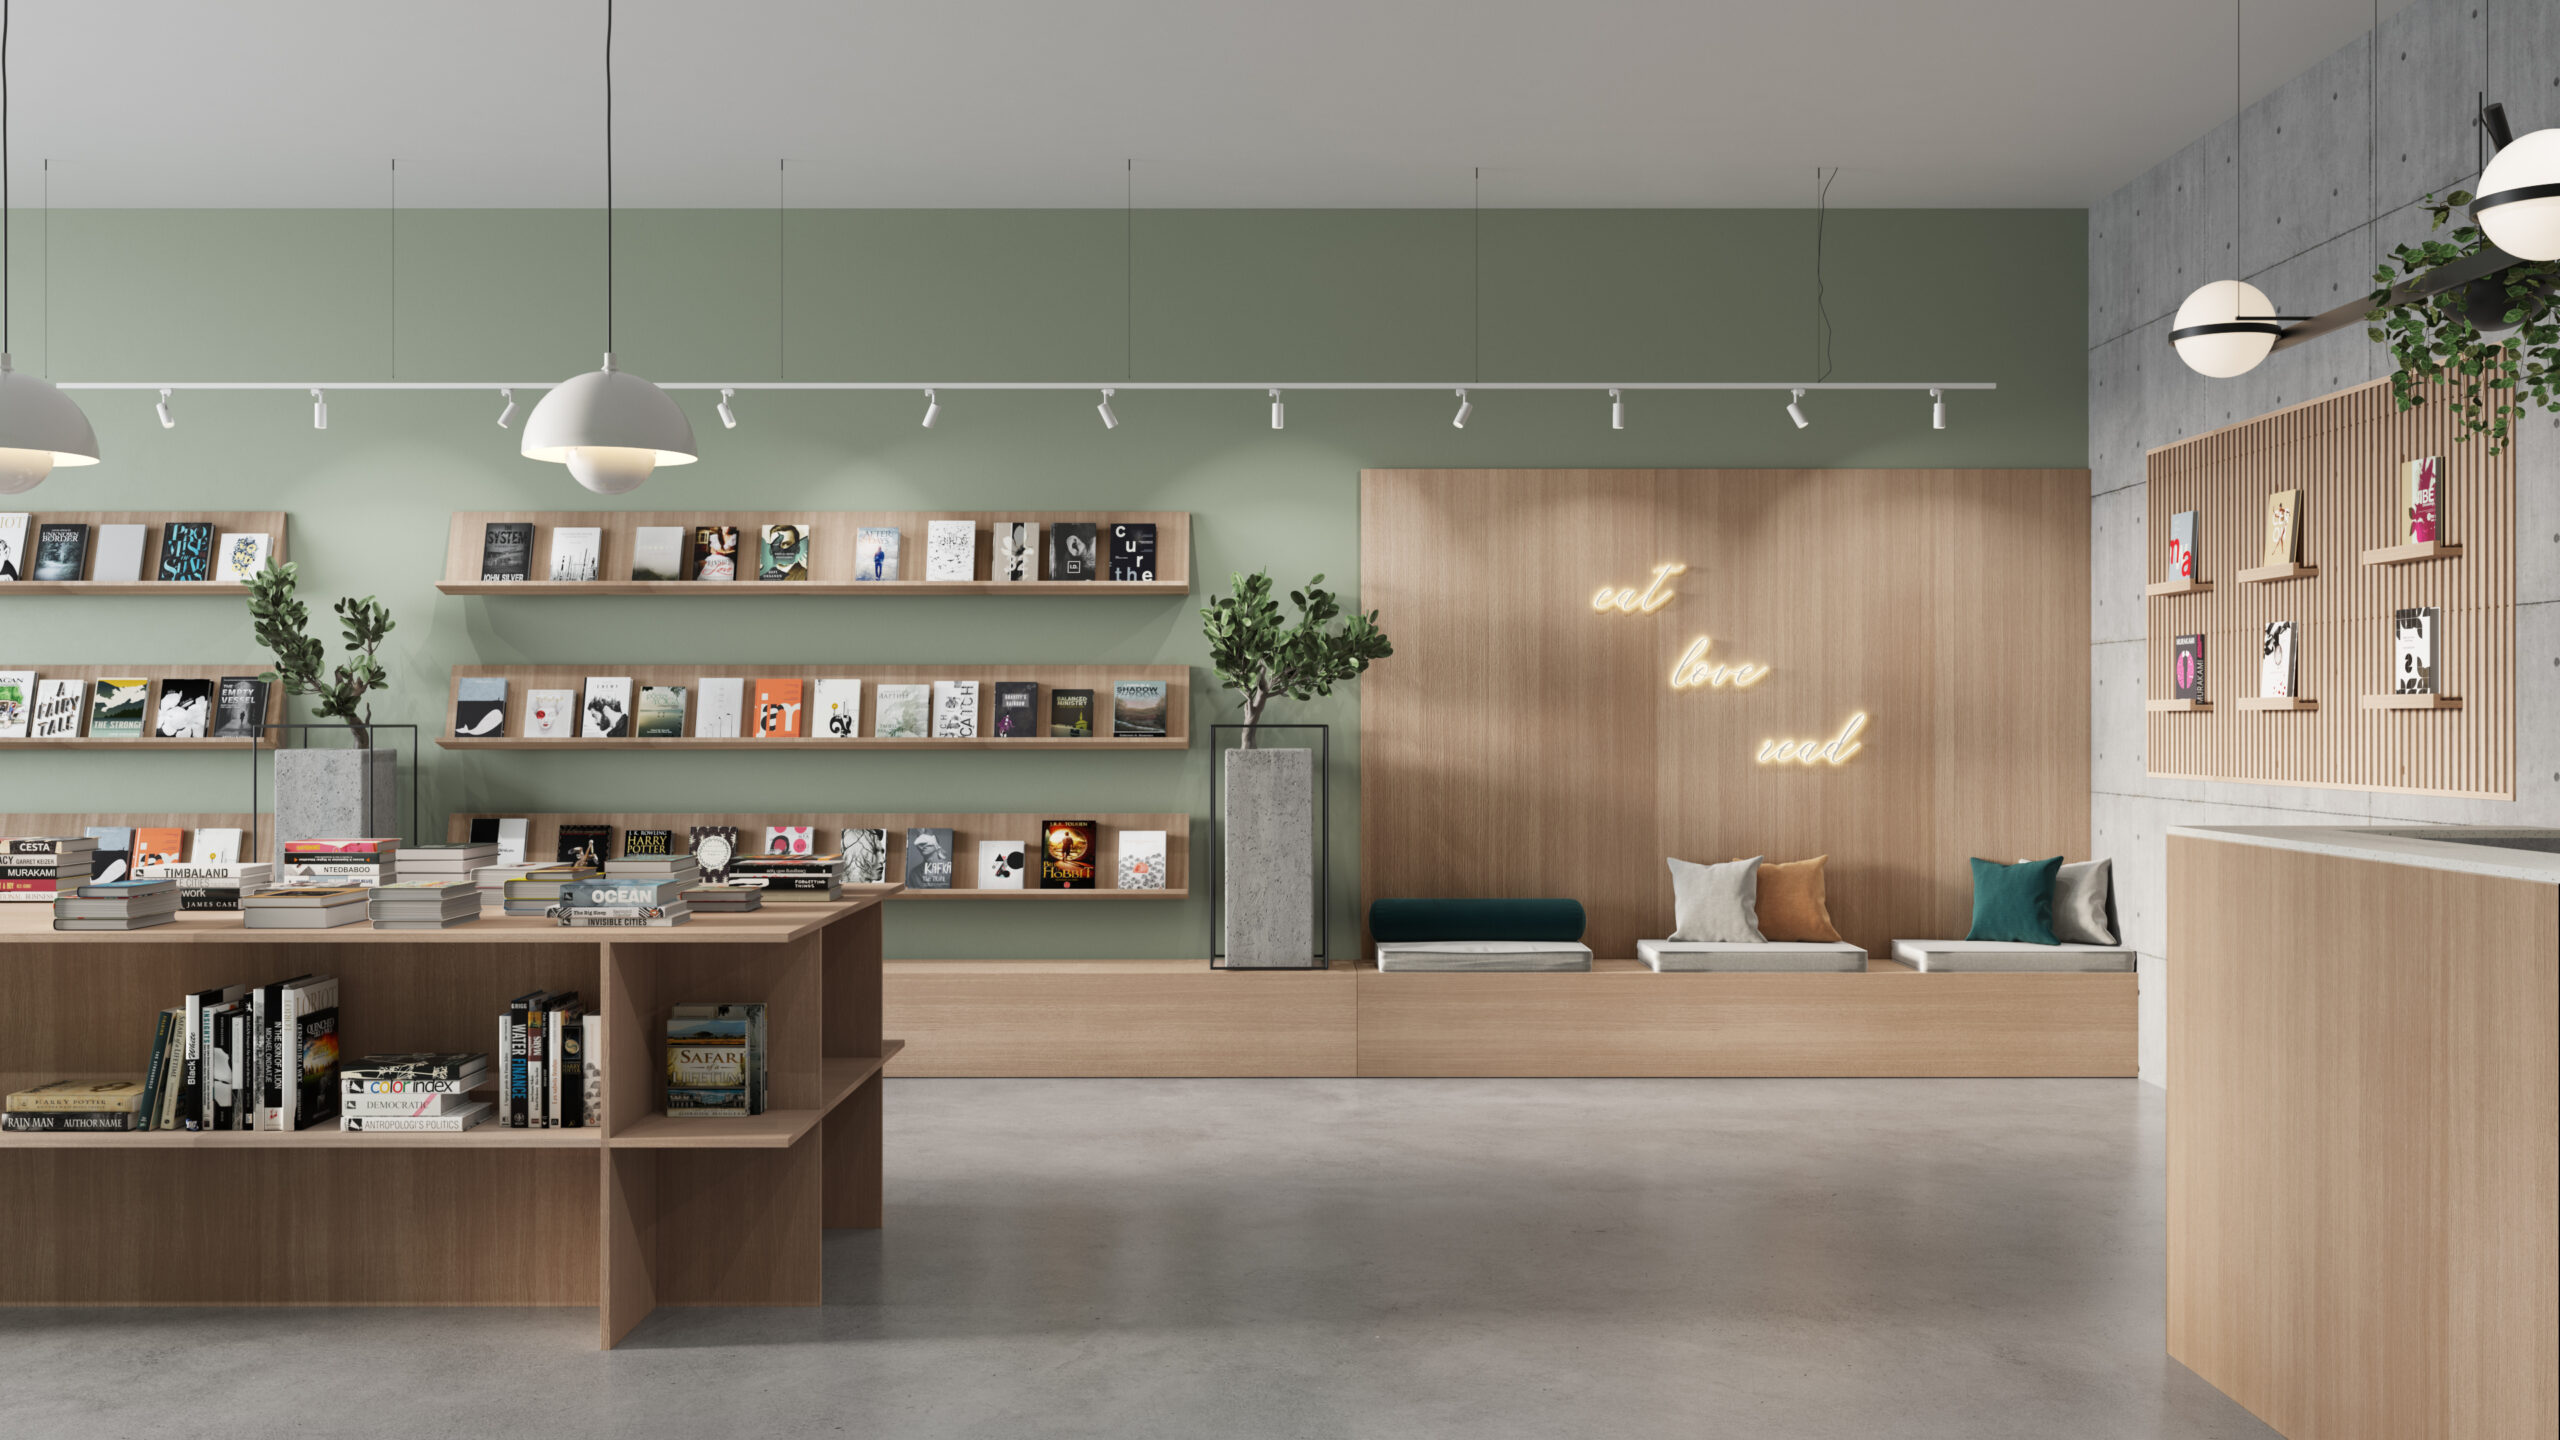 Image of a Book Store with furniture made with Thermally Fused Laminate in Rift Oak by Duramar.